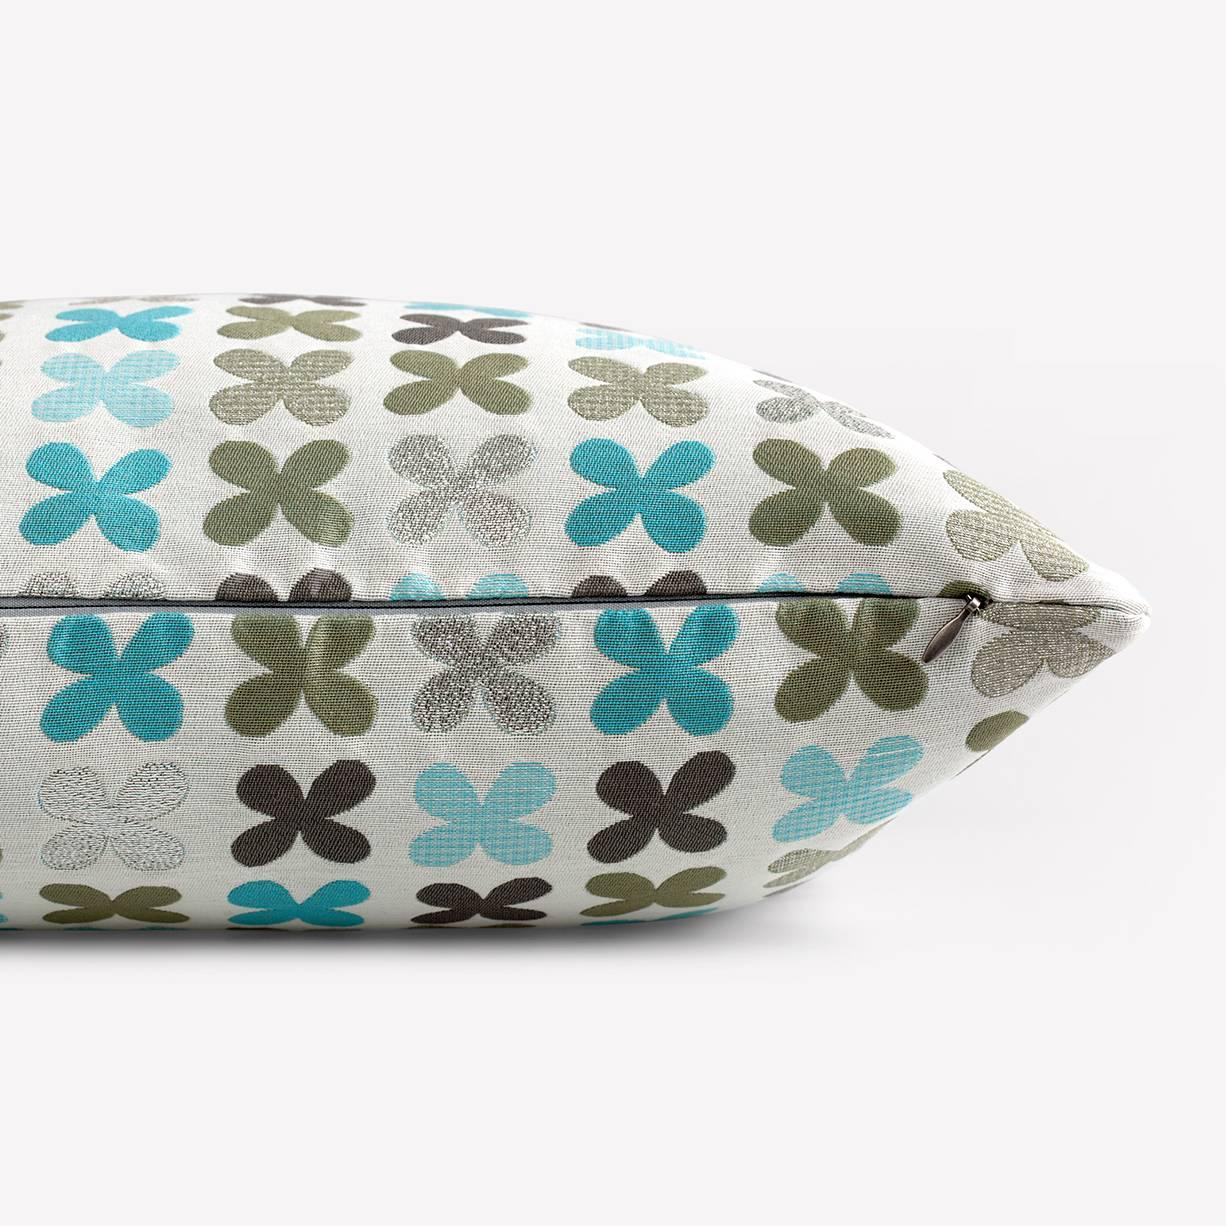 Maharam Pillow
Quatrefoil by Alexander Girard 
001 Silver

Alexander Girard drew inspiration from his world travels, as well as from his fascination with traditional folk art. Quatrefoil, originally designed by him in 1954, represents these